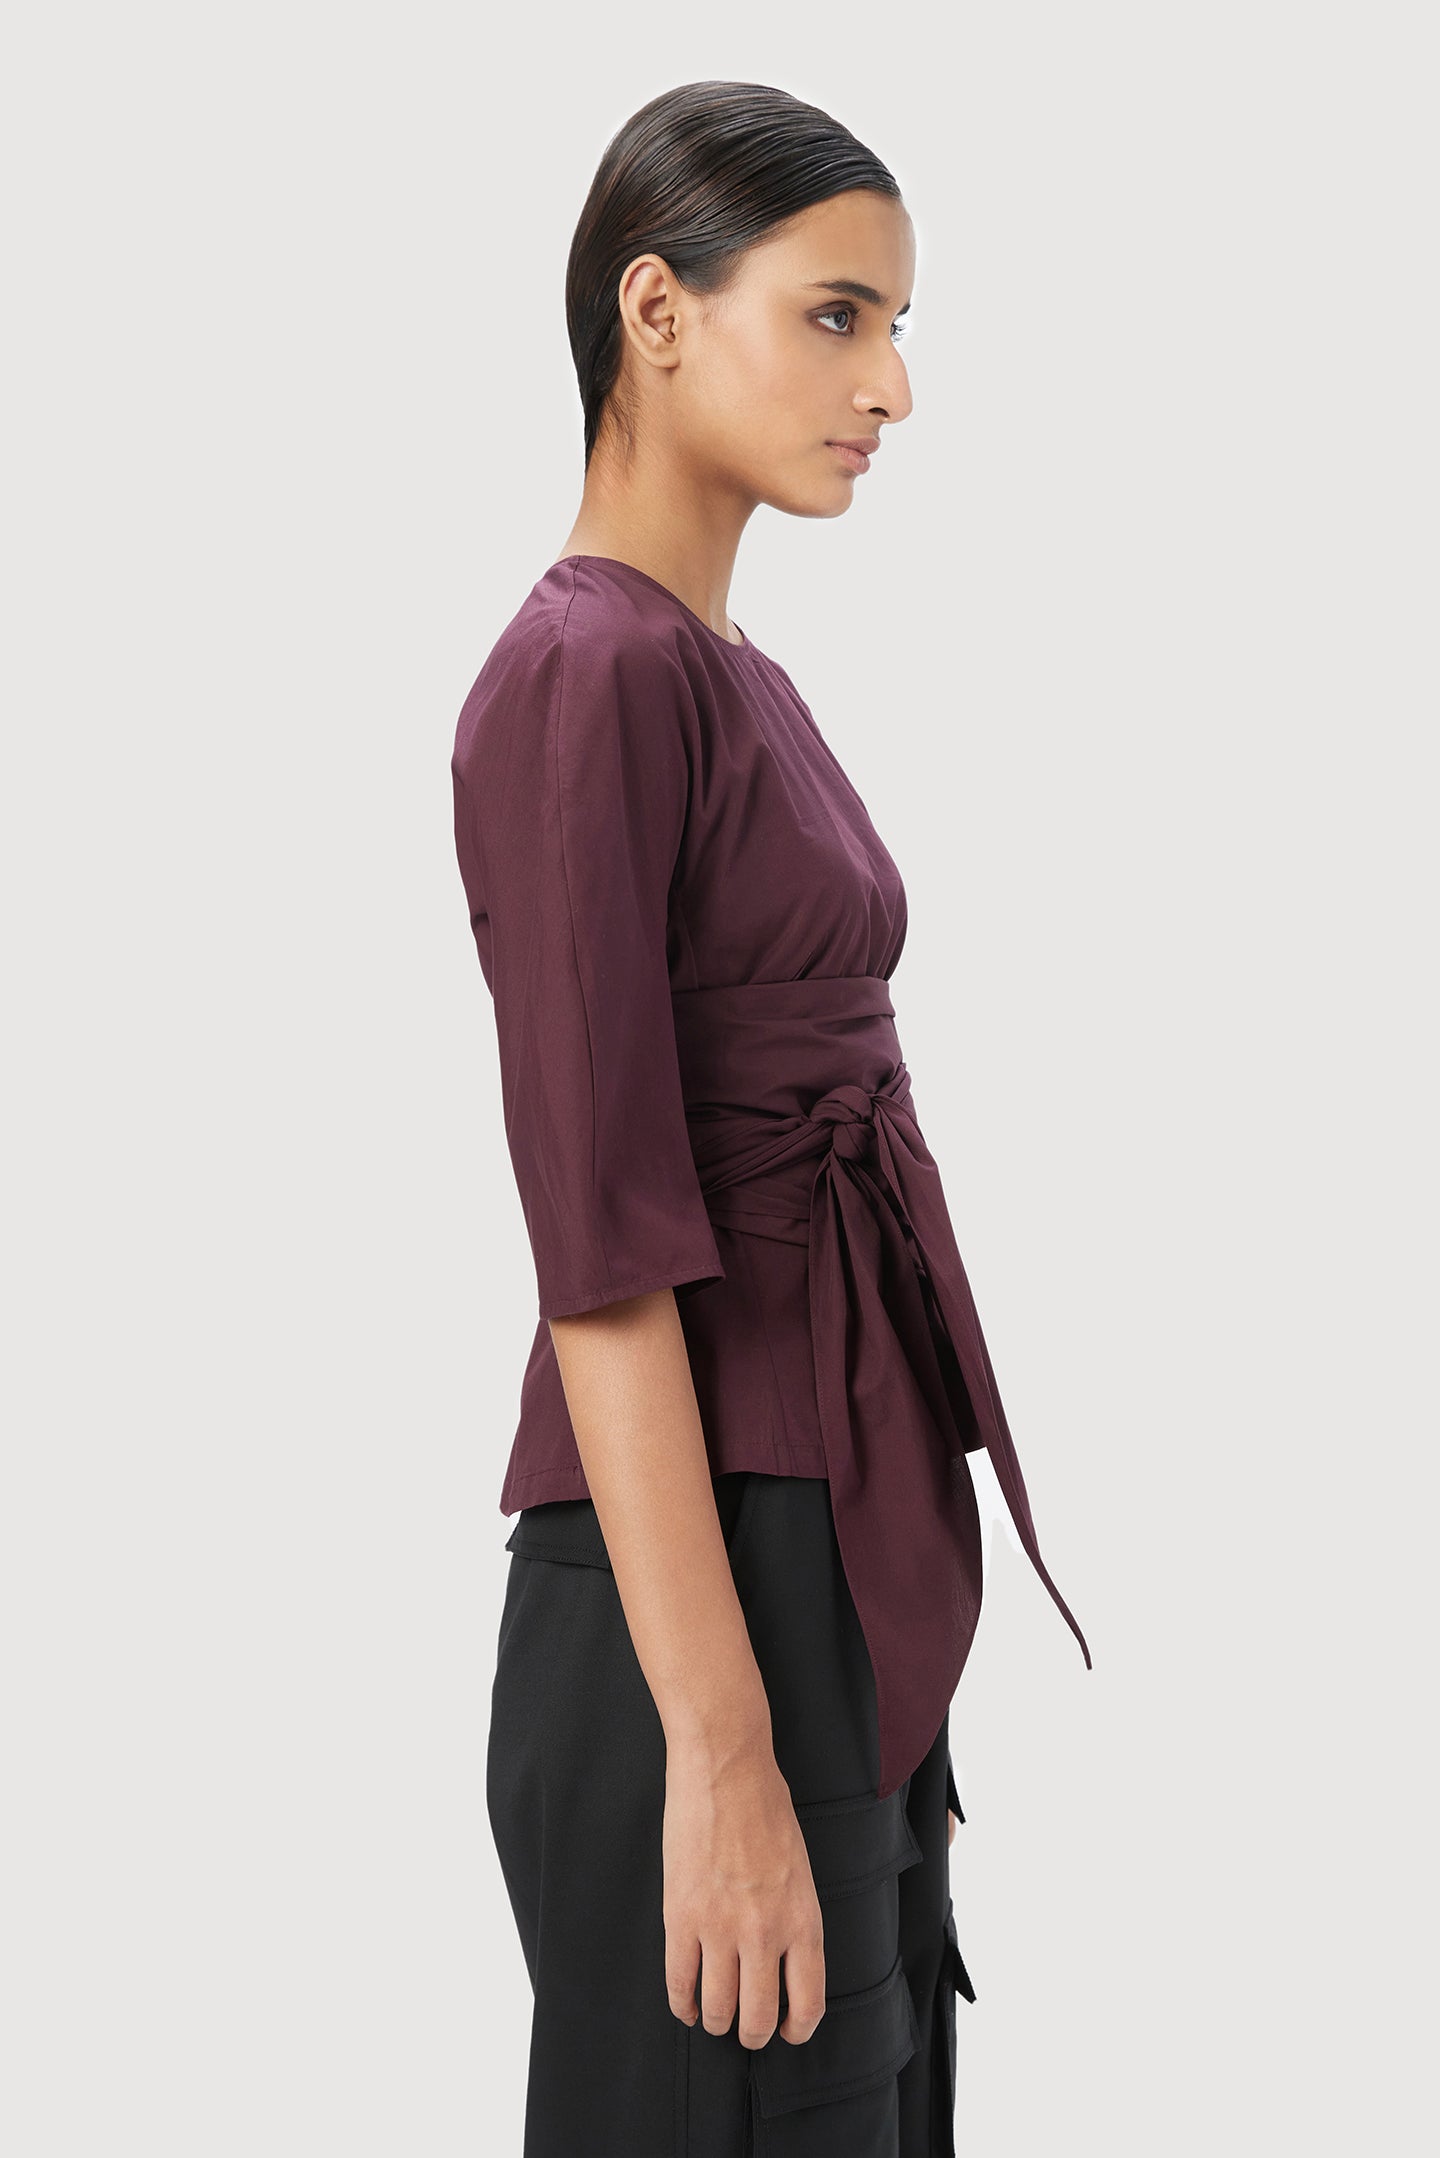 Slim Fit Round Neck Top with Soft Rounded Shoulders